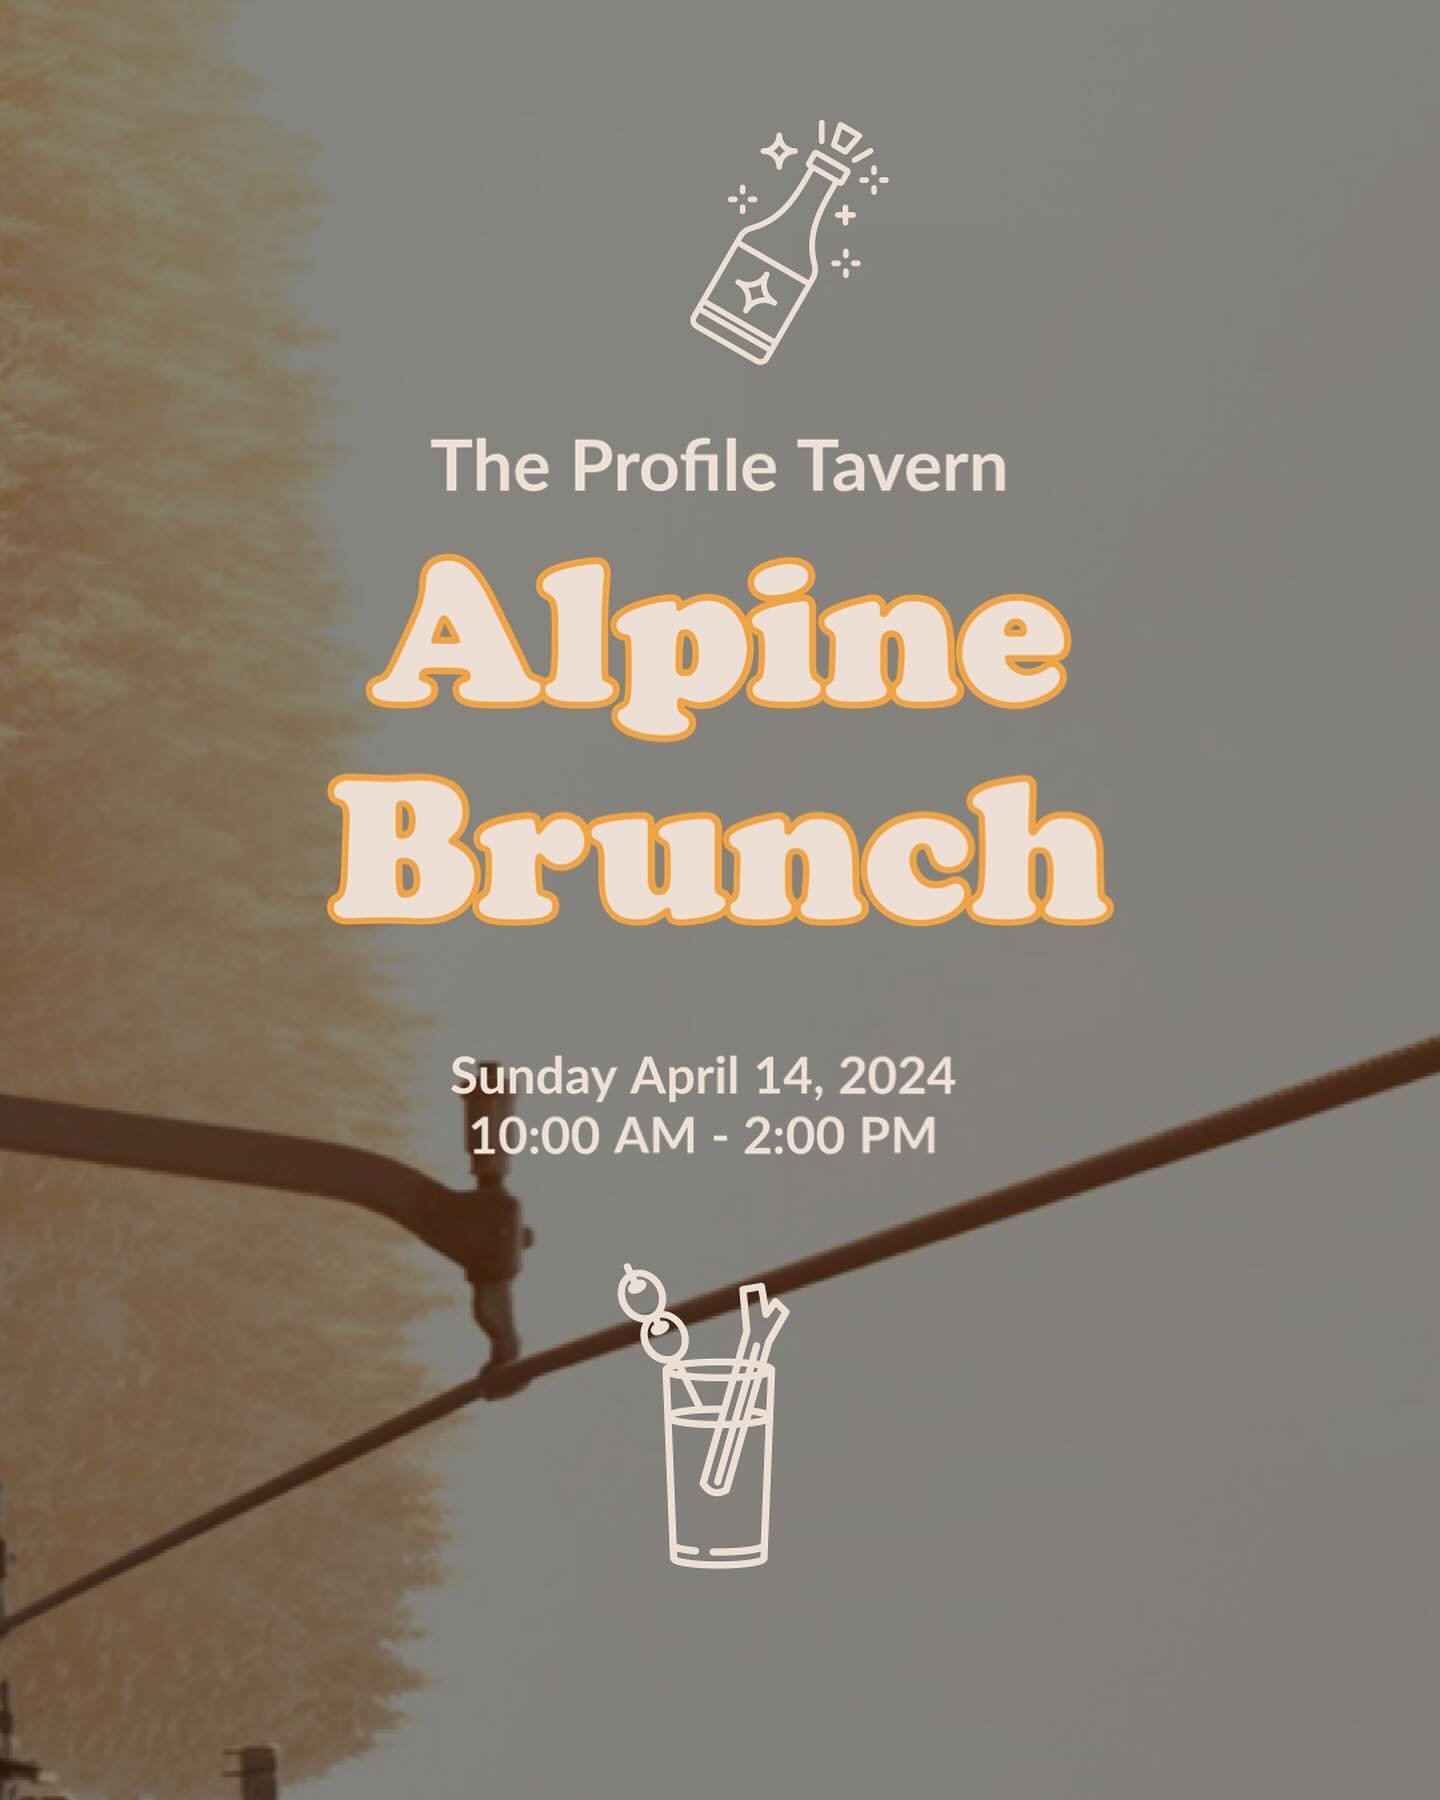 🔥🥓💥🥂🫶🏼⛷️ View our menu for this Sunday and make your reservations for our Alpine Brunch by heading to www.profiletavern.com ‼️
.
.
.
The Profile Tavern
2 Crossroads Drive | East Freetown, MA
508.763.4405